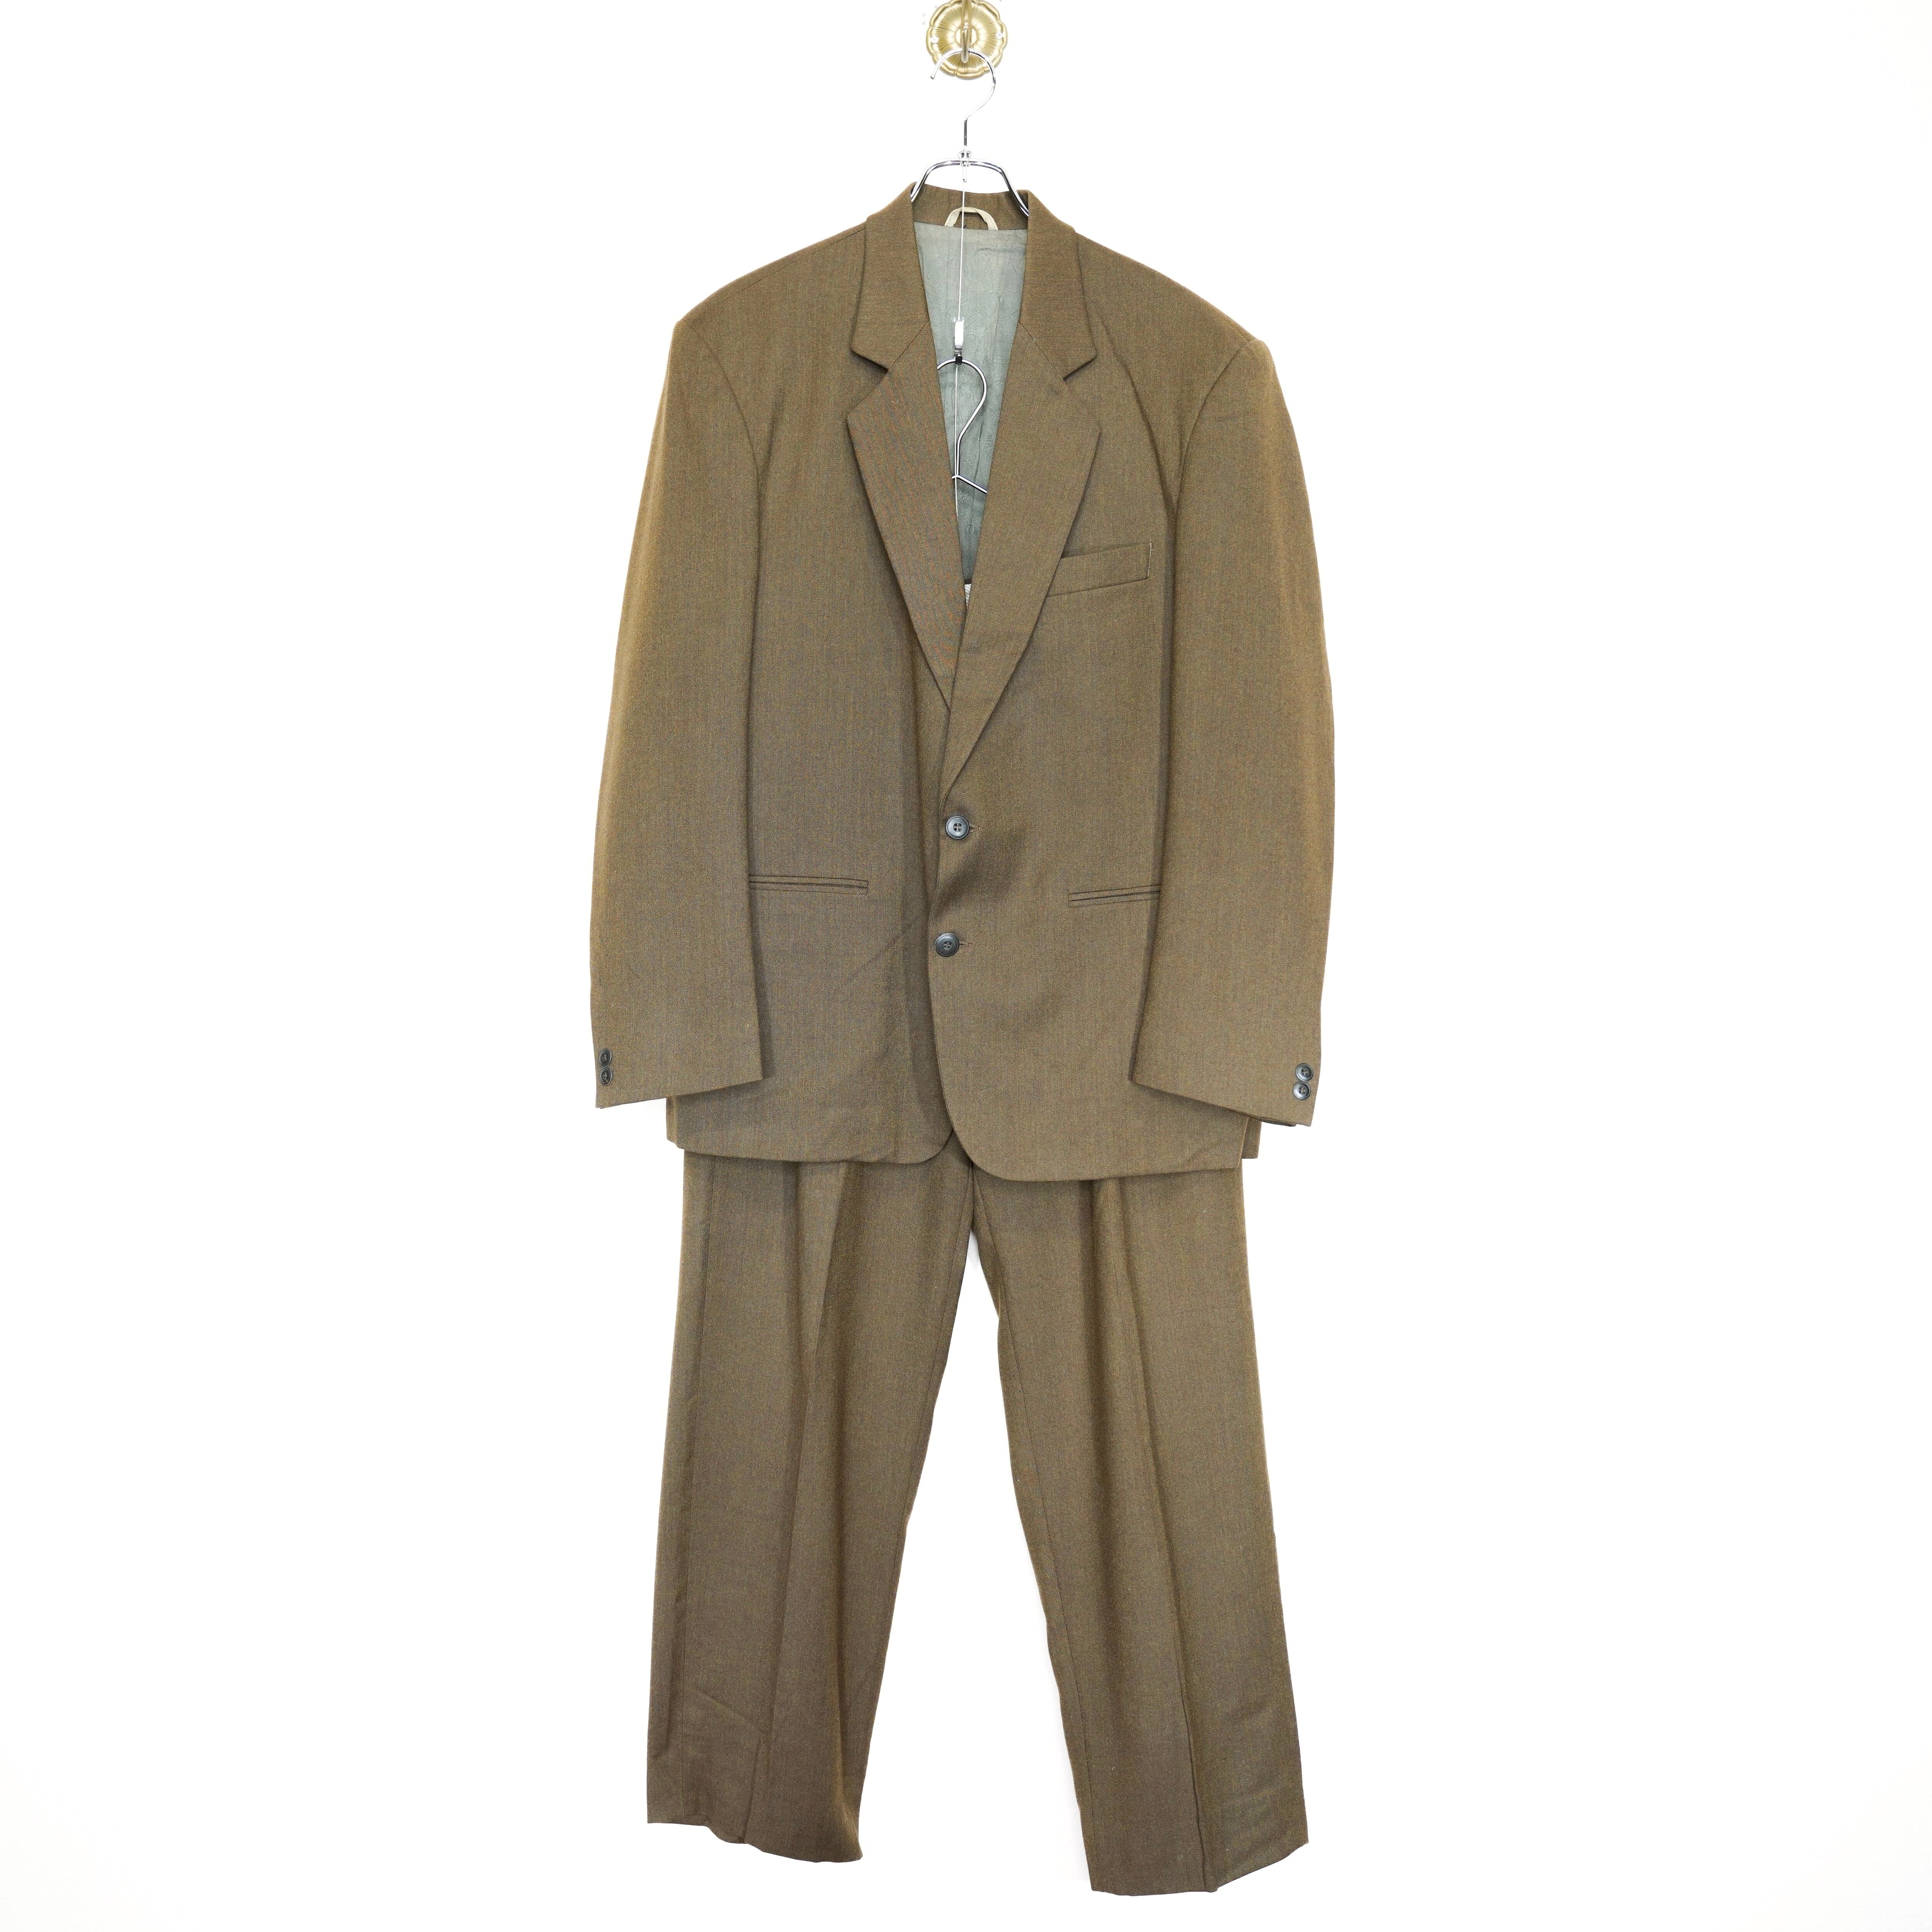 EU VINTAGE OVERTOP OLIVE COLOR WOOL SET UP SUIT MADE IN ITALY 